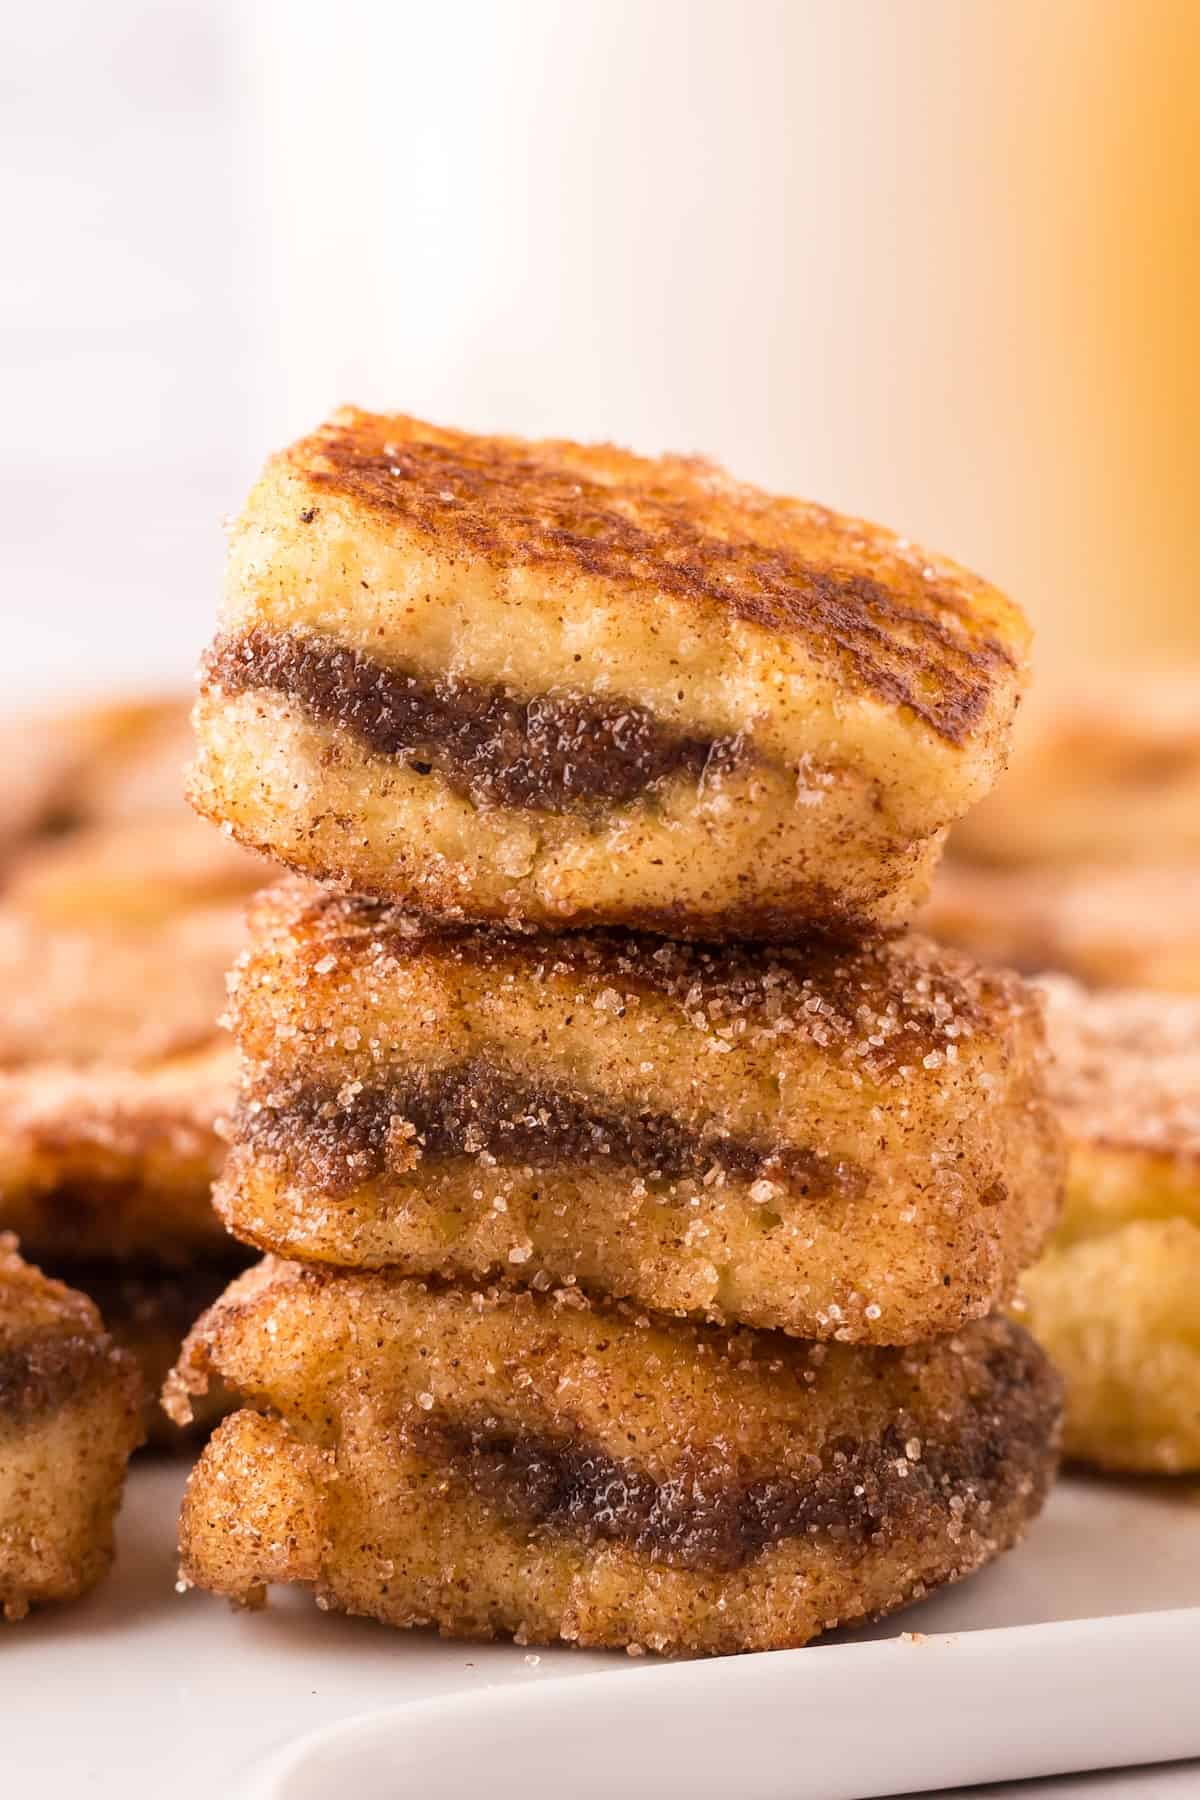 A stack of stuffed french toast bites on a plate.